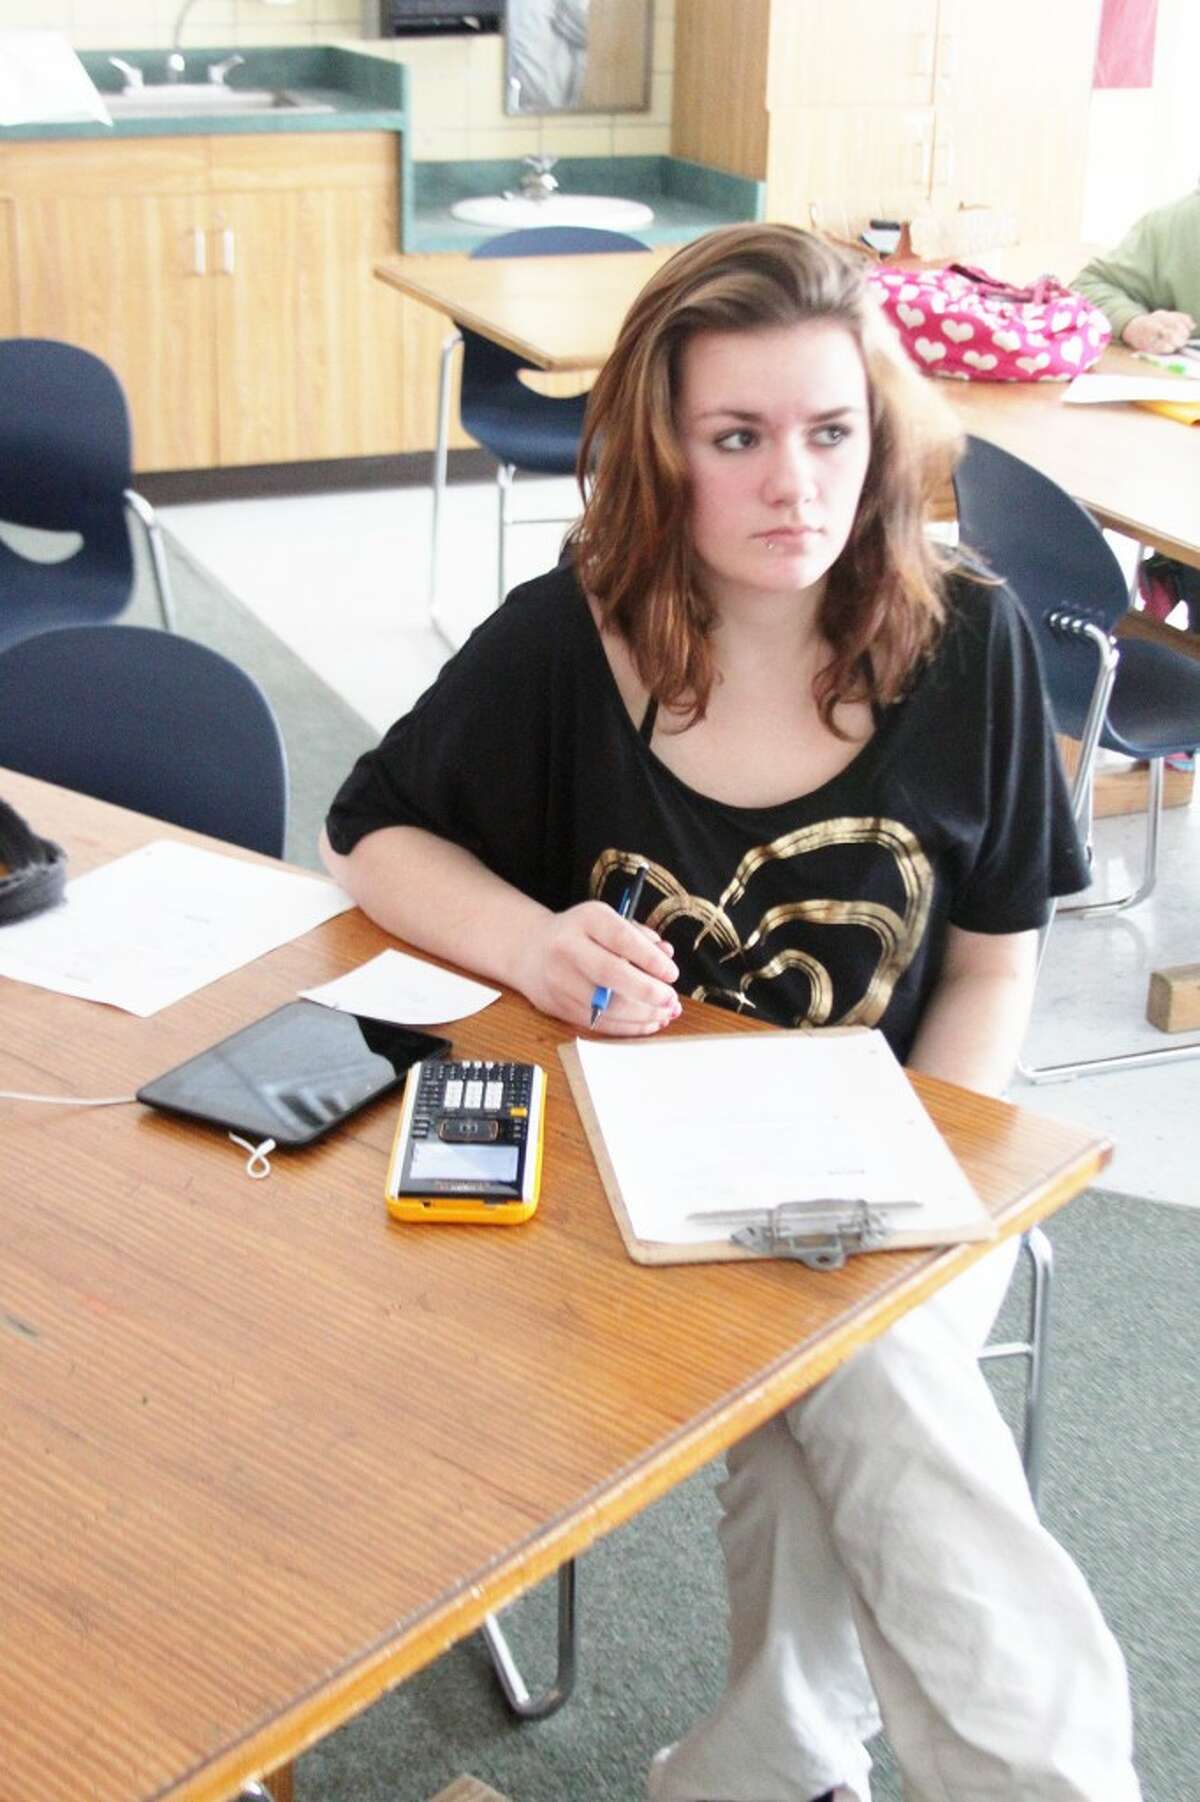 A CASMAN Academy math student is shown using one of the Texas Instrument calculators that are assisting students in their math studies.(Ken Grabowski/News Advocate)